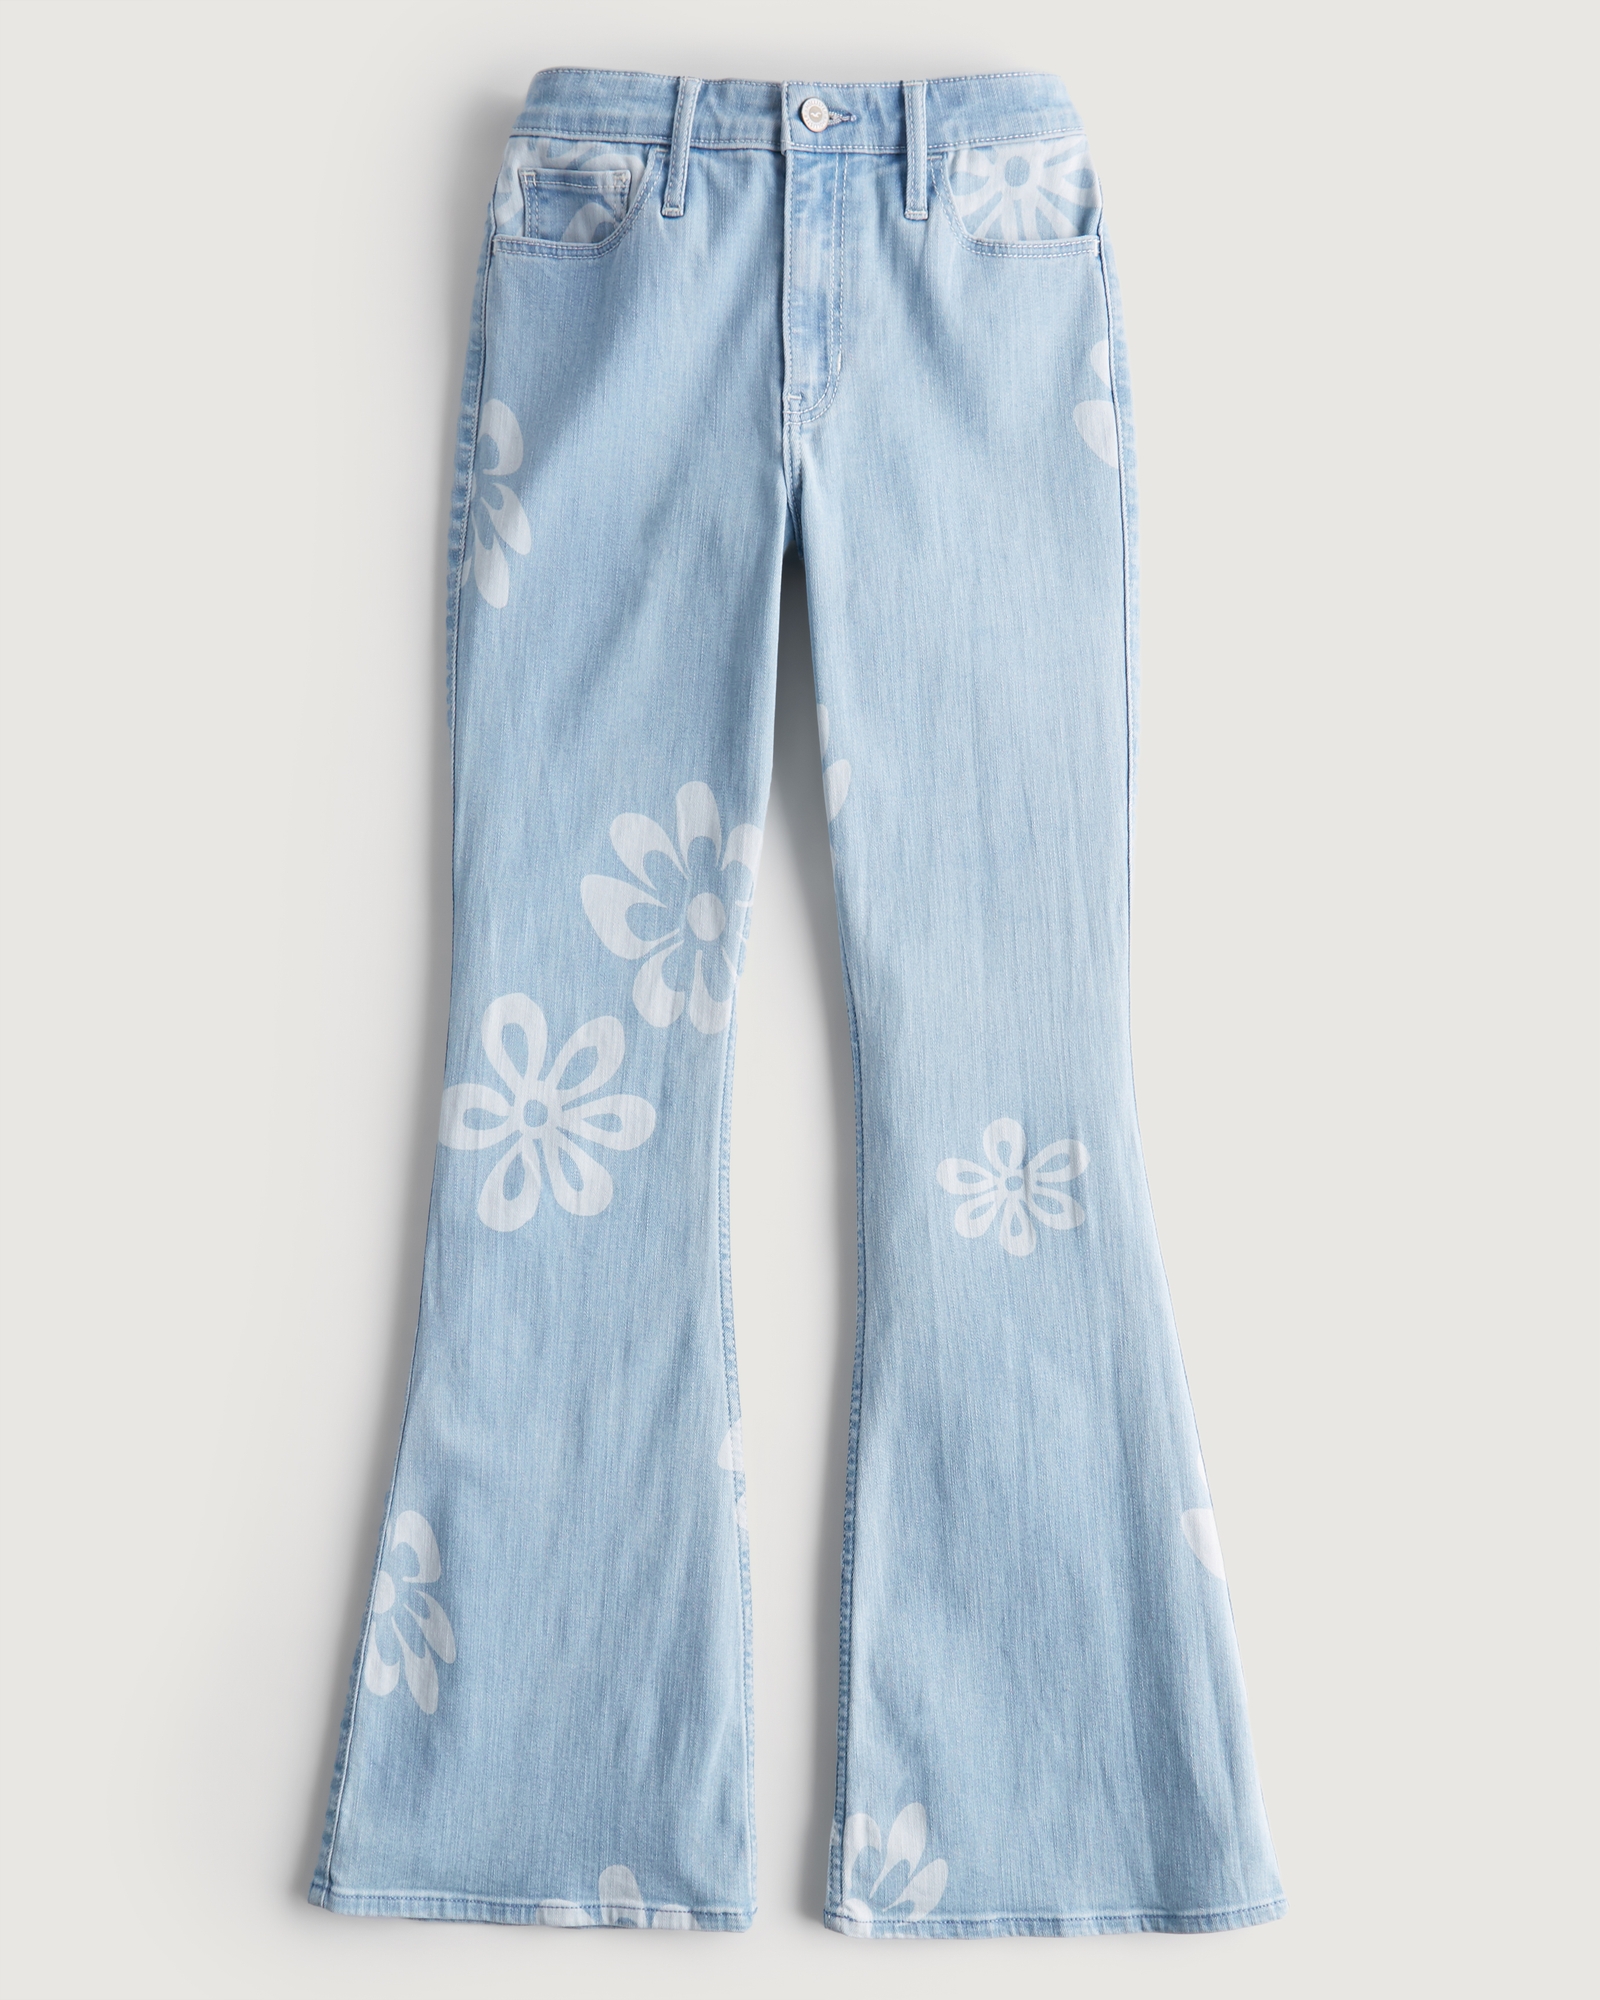 Women's High-Rise Light Wash Floral Print Flare Jeans, Women's Clearance